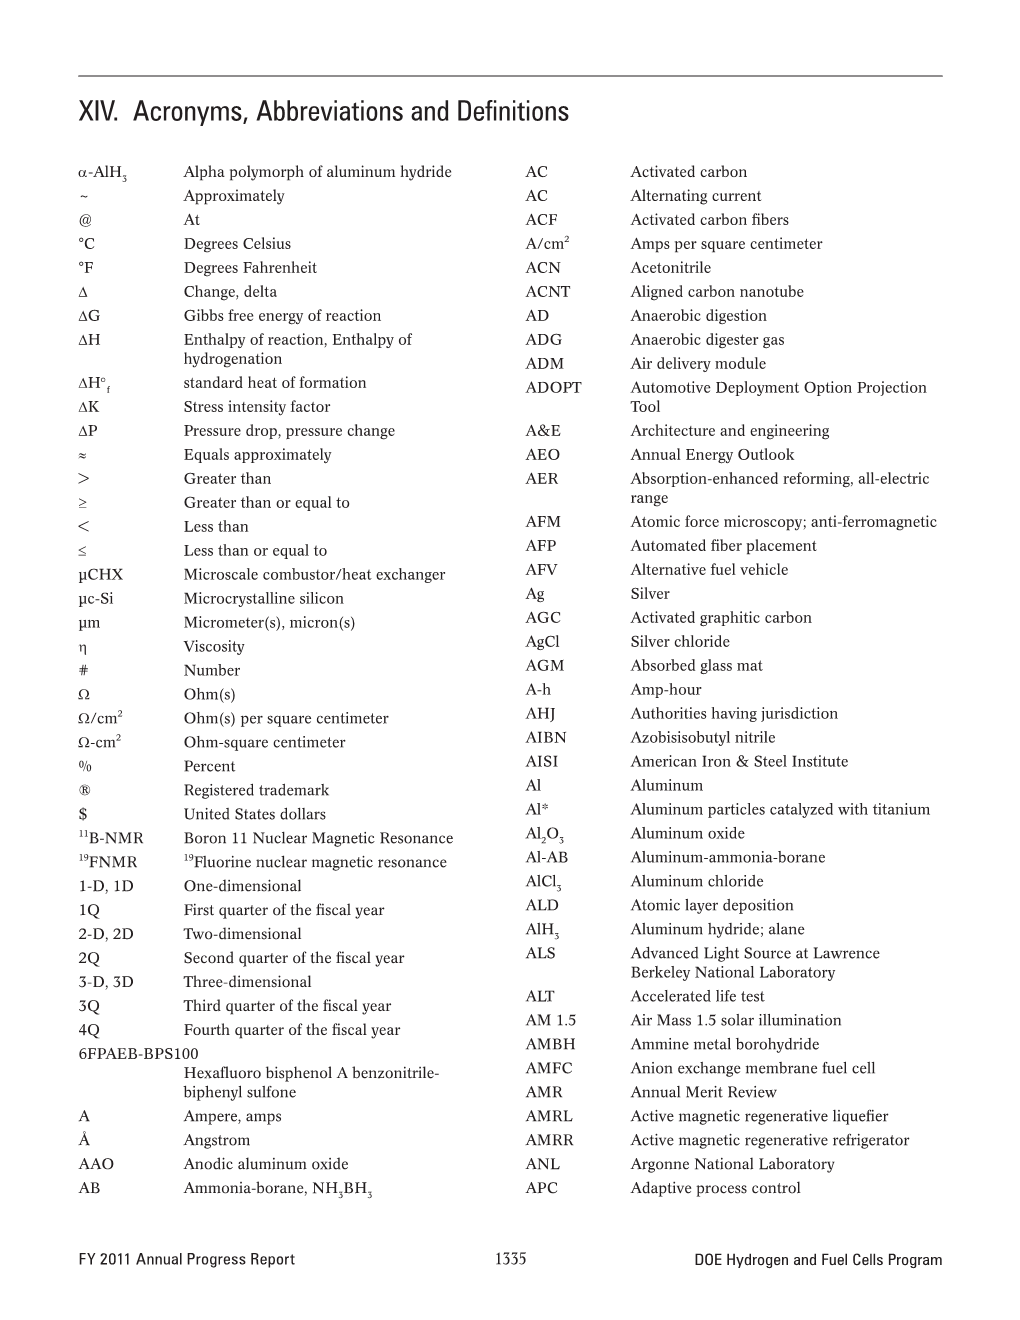 Acronyms, Abbreviations and Definitions